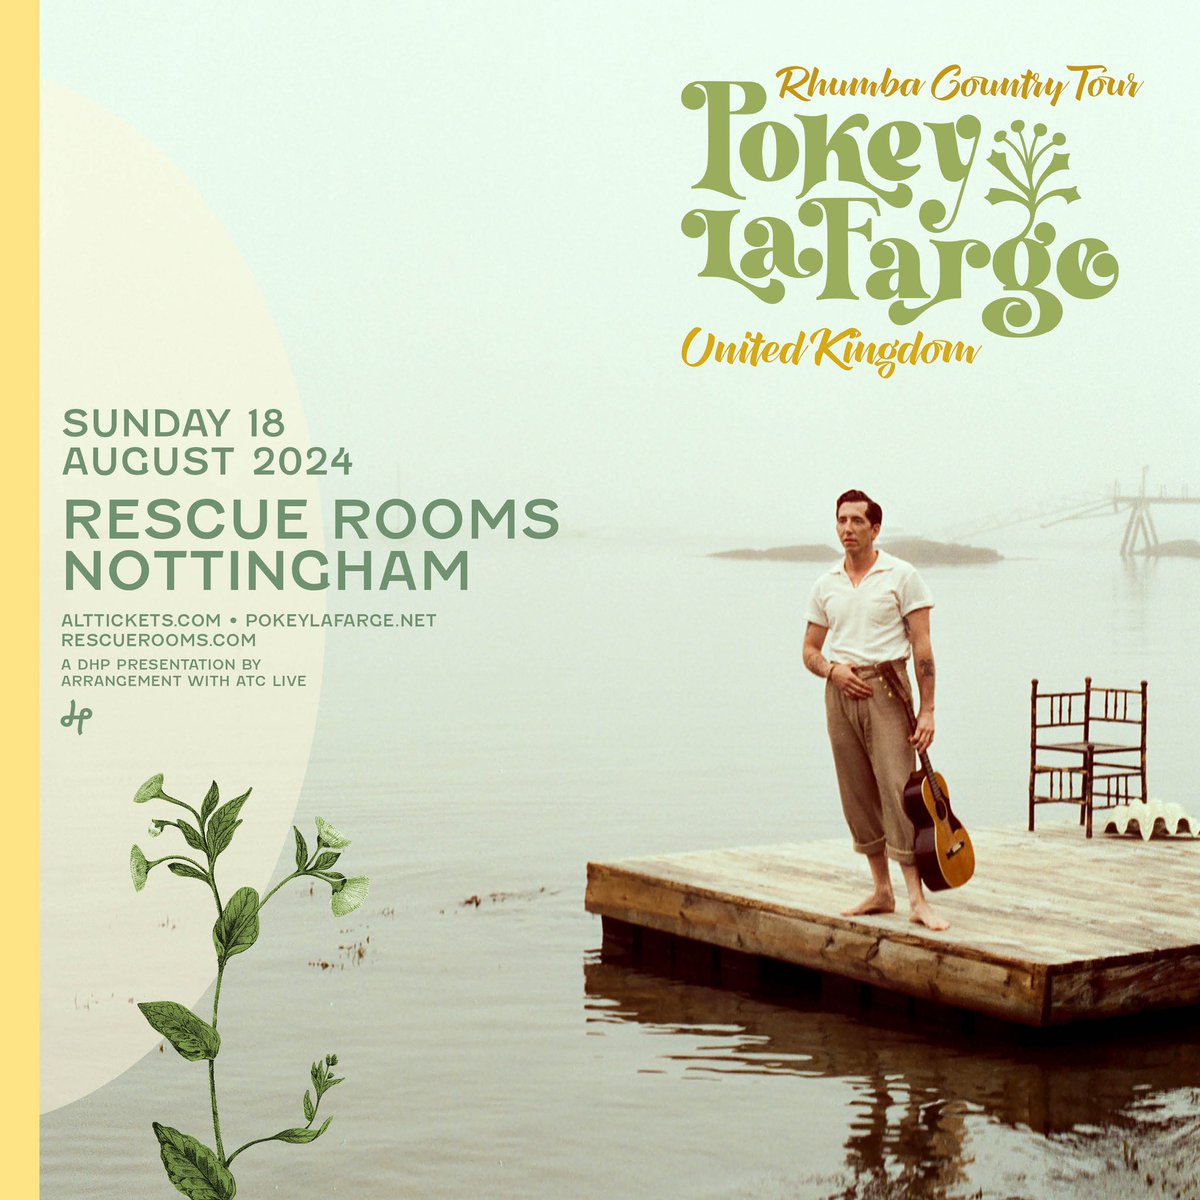 Just announced! 🎉 Tickets on sale now for August 18th @rescuerooms Nottingham UK! Tickets at: alttickets.com/pokey-lafarge-… 🎟️🎟️🎟️